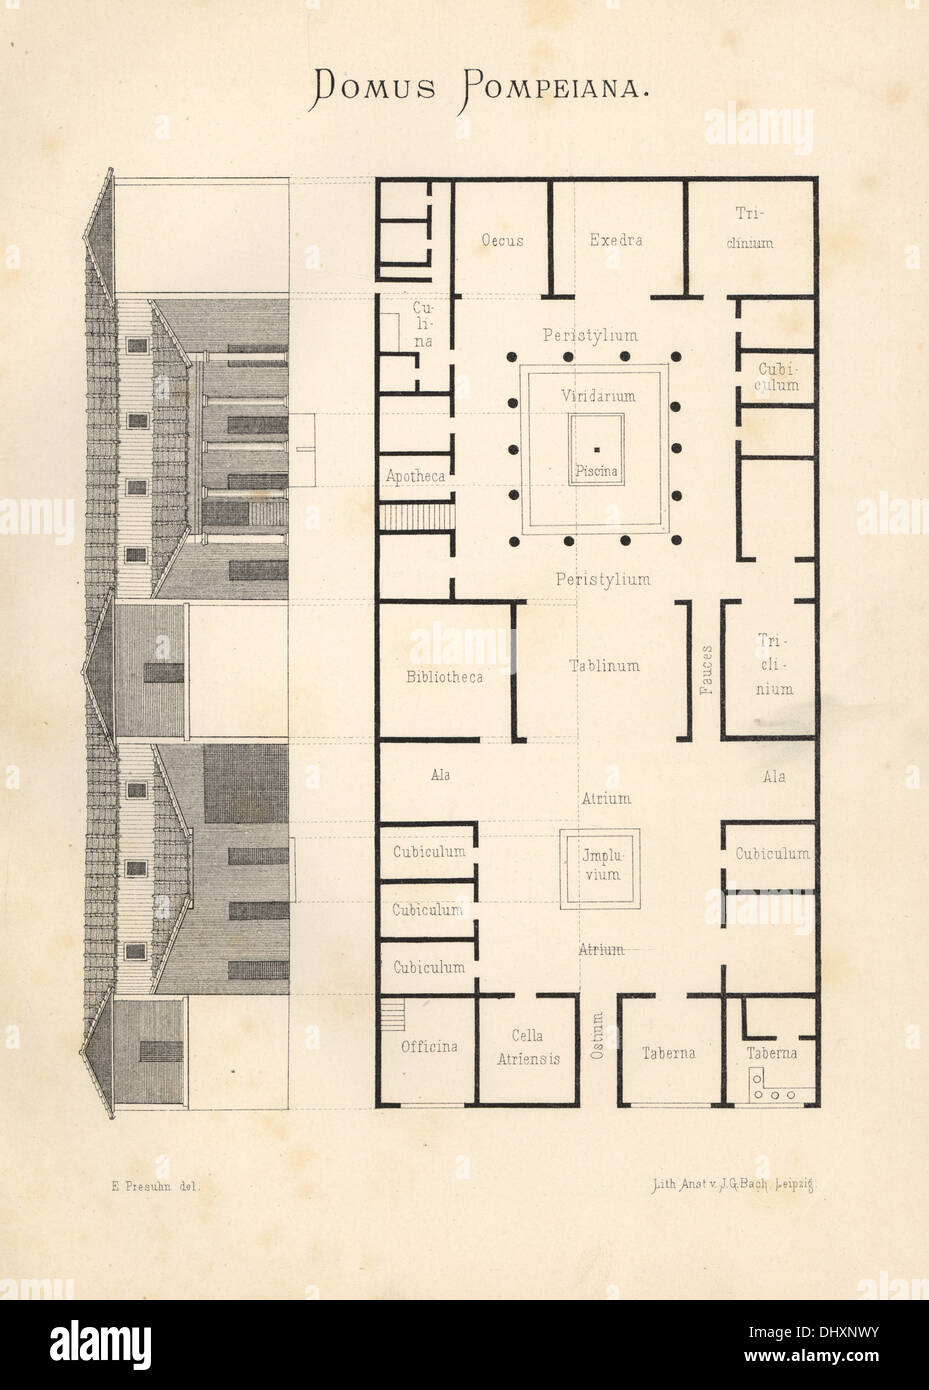 Domus Pompeiana: floor plan and elevation of a luxurious house in Pompeii. Stock Photo